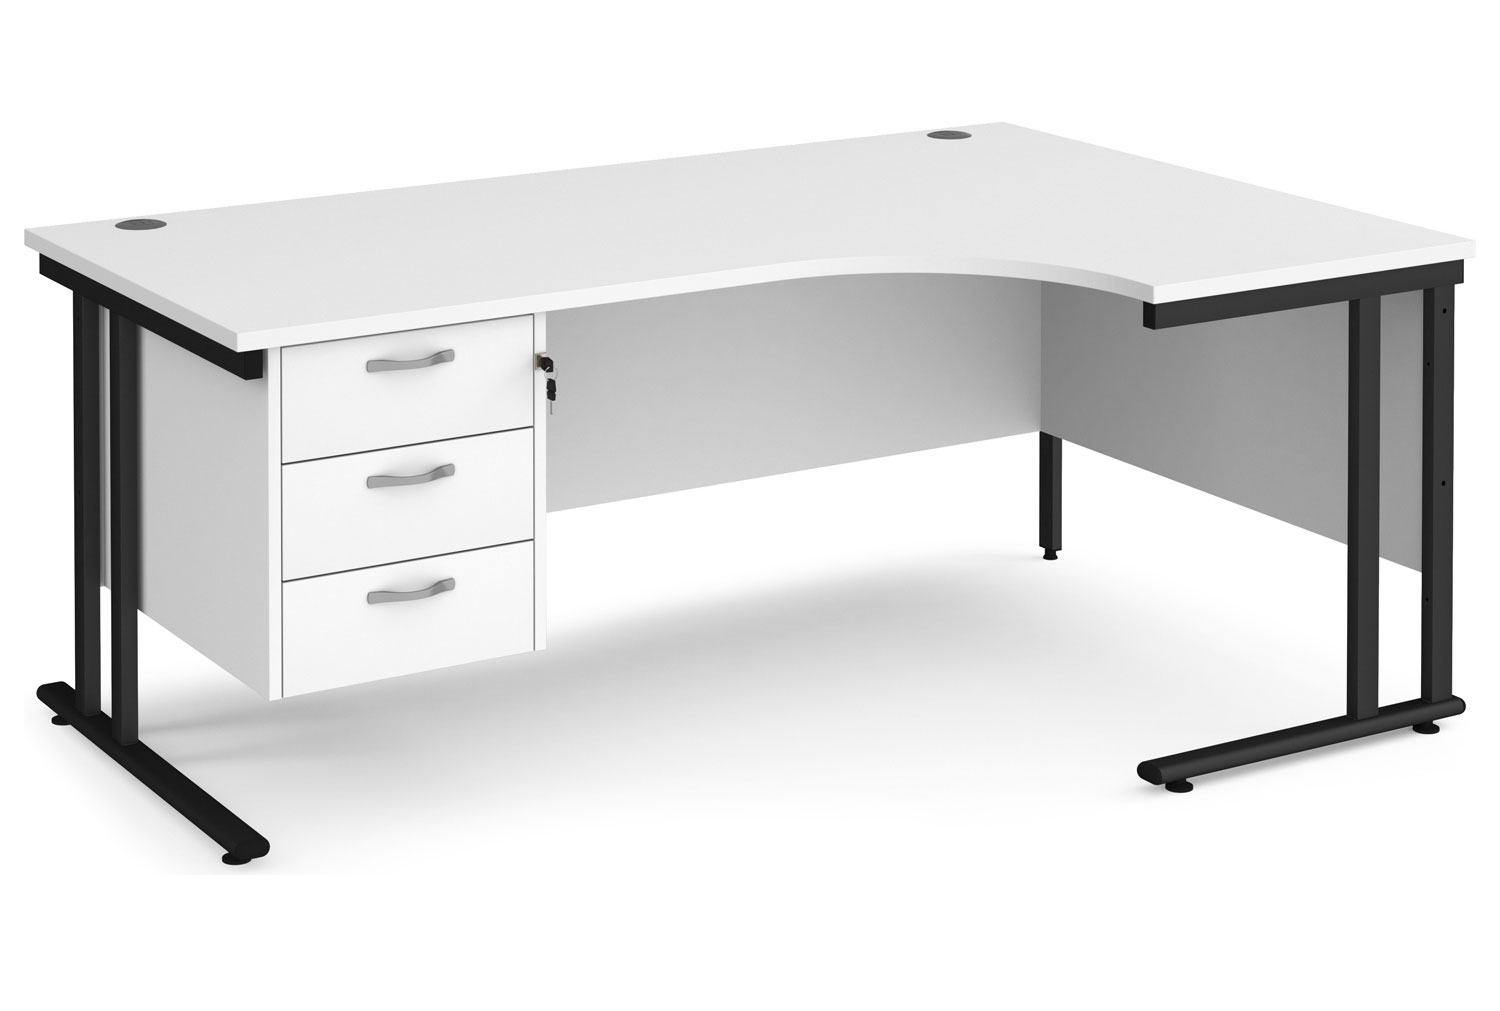 Value Line Deluxe C-Leg Right Hand Ergonomic Office Desk 3 Drawers (Black Legs), 180wx120/80dx73h (cm), White, Express Delivery